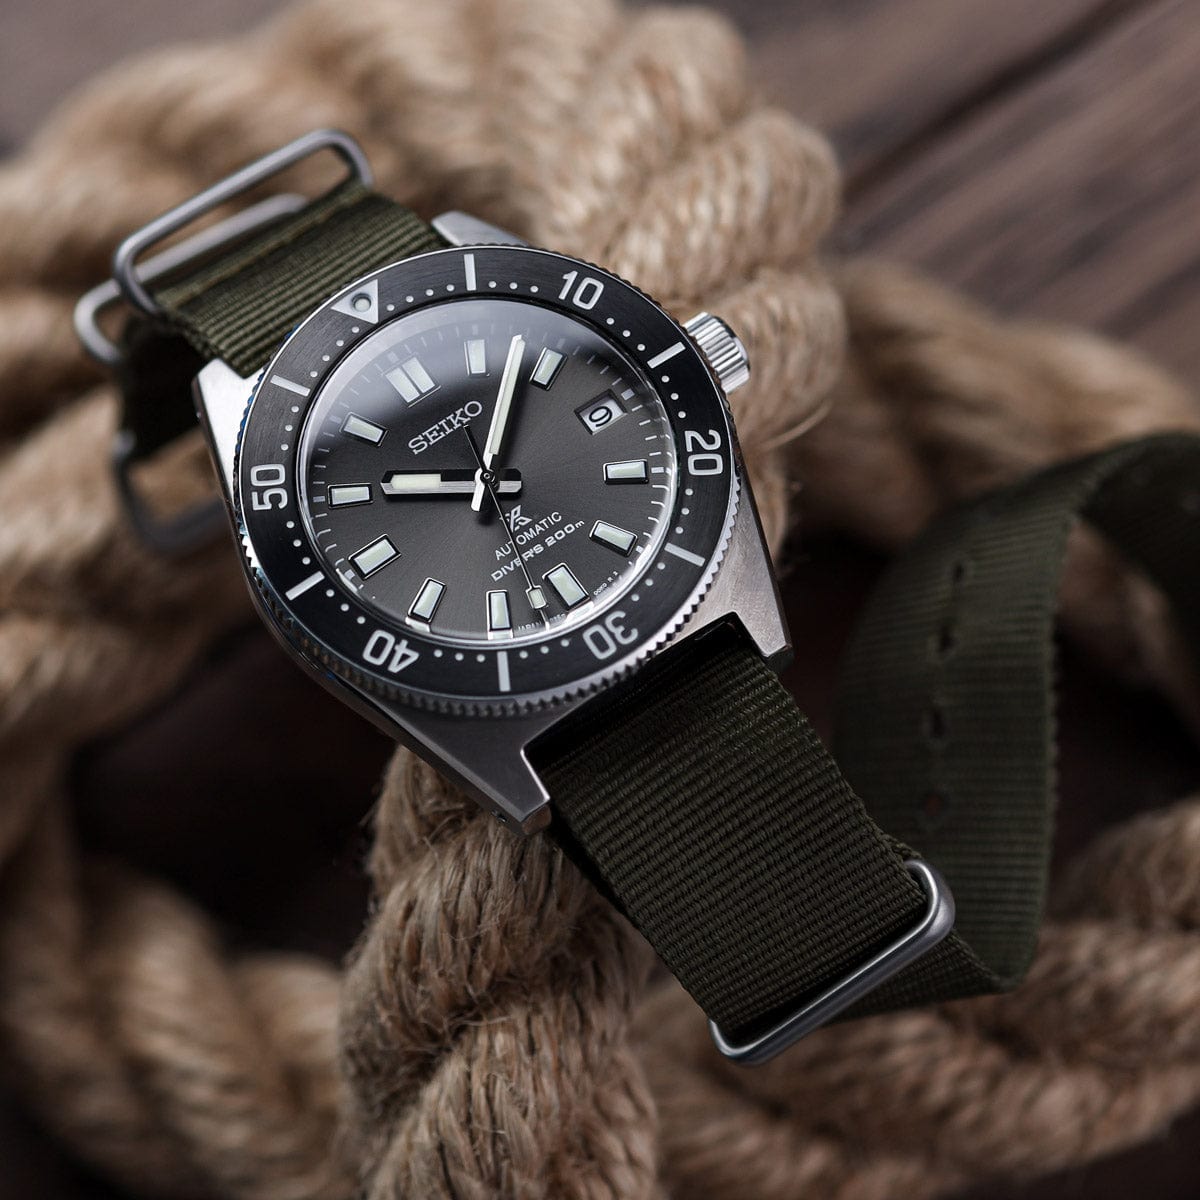 The Vintage Watch Company Military Watch Strap - Olive Green